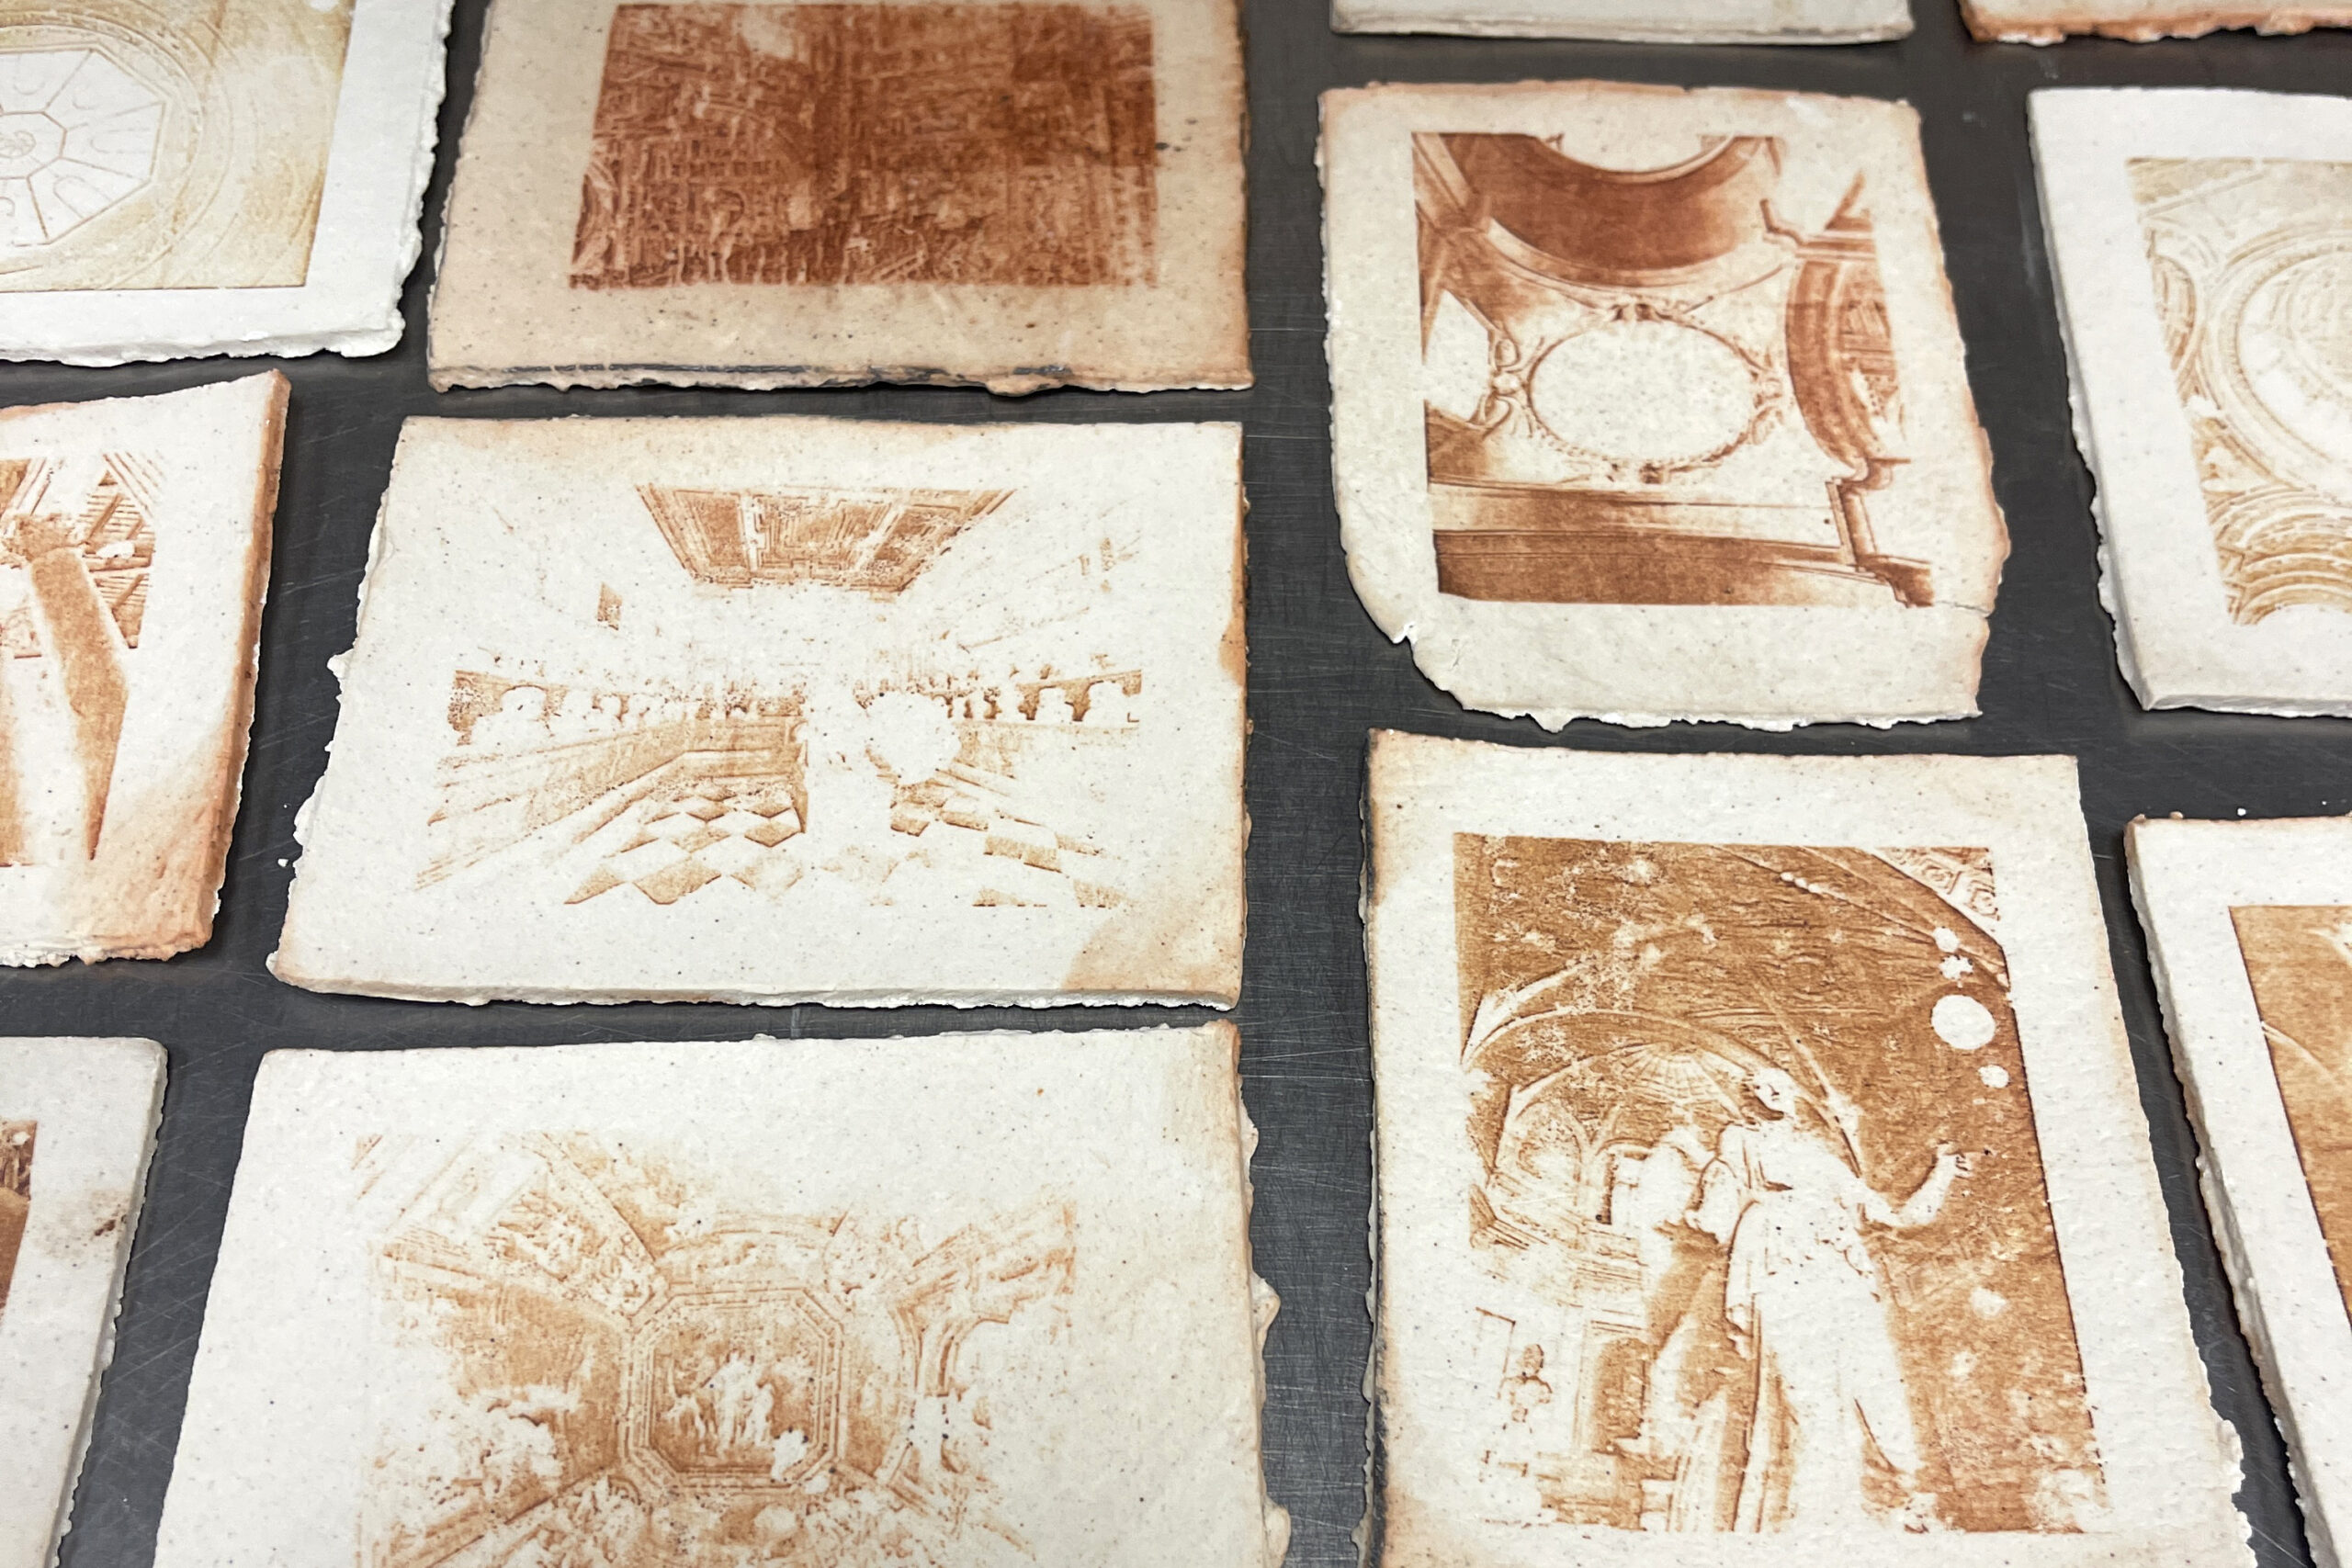 Clay prints of Roman art and architecture by Hope Bass